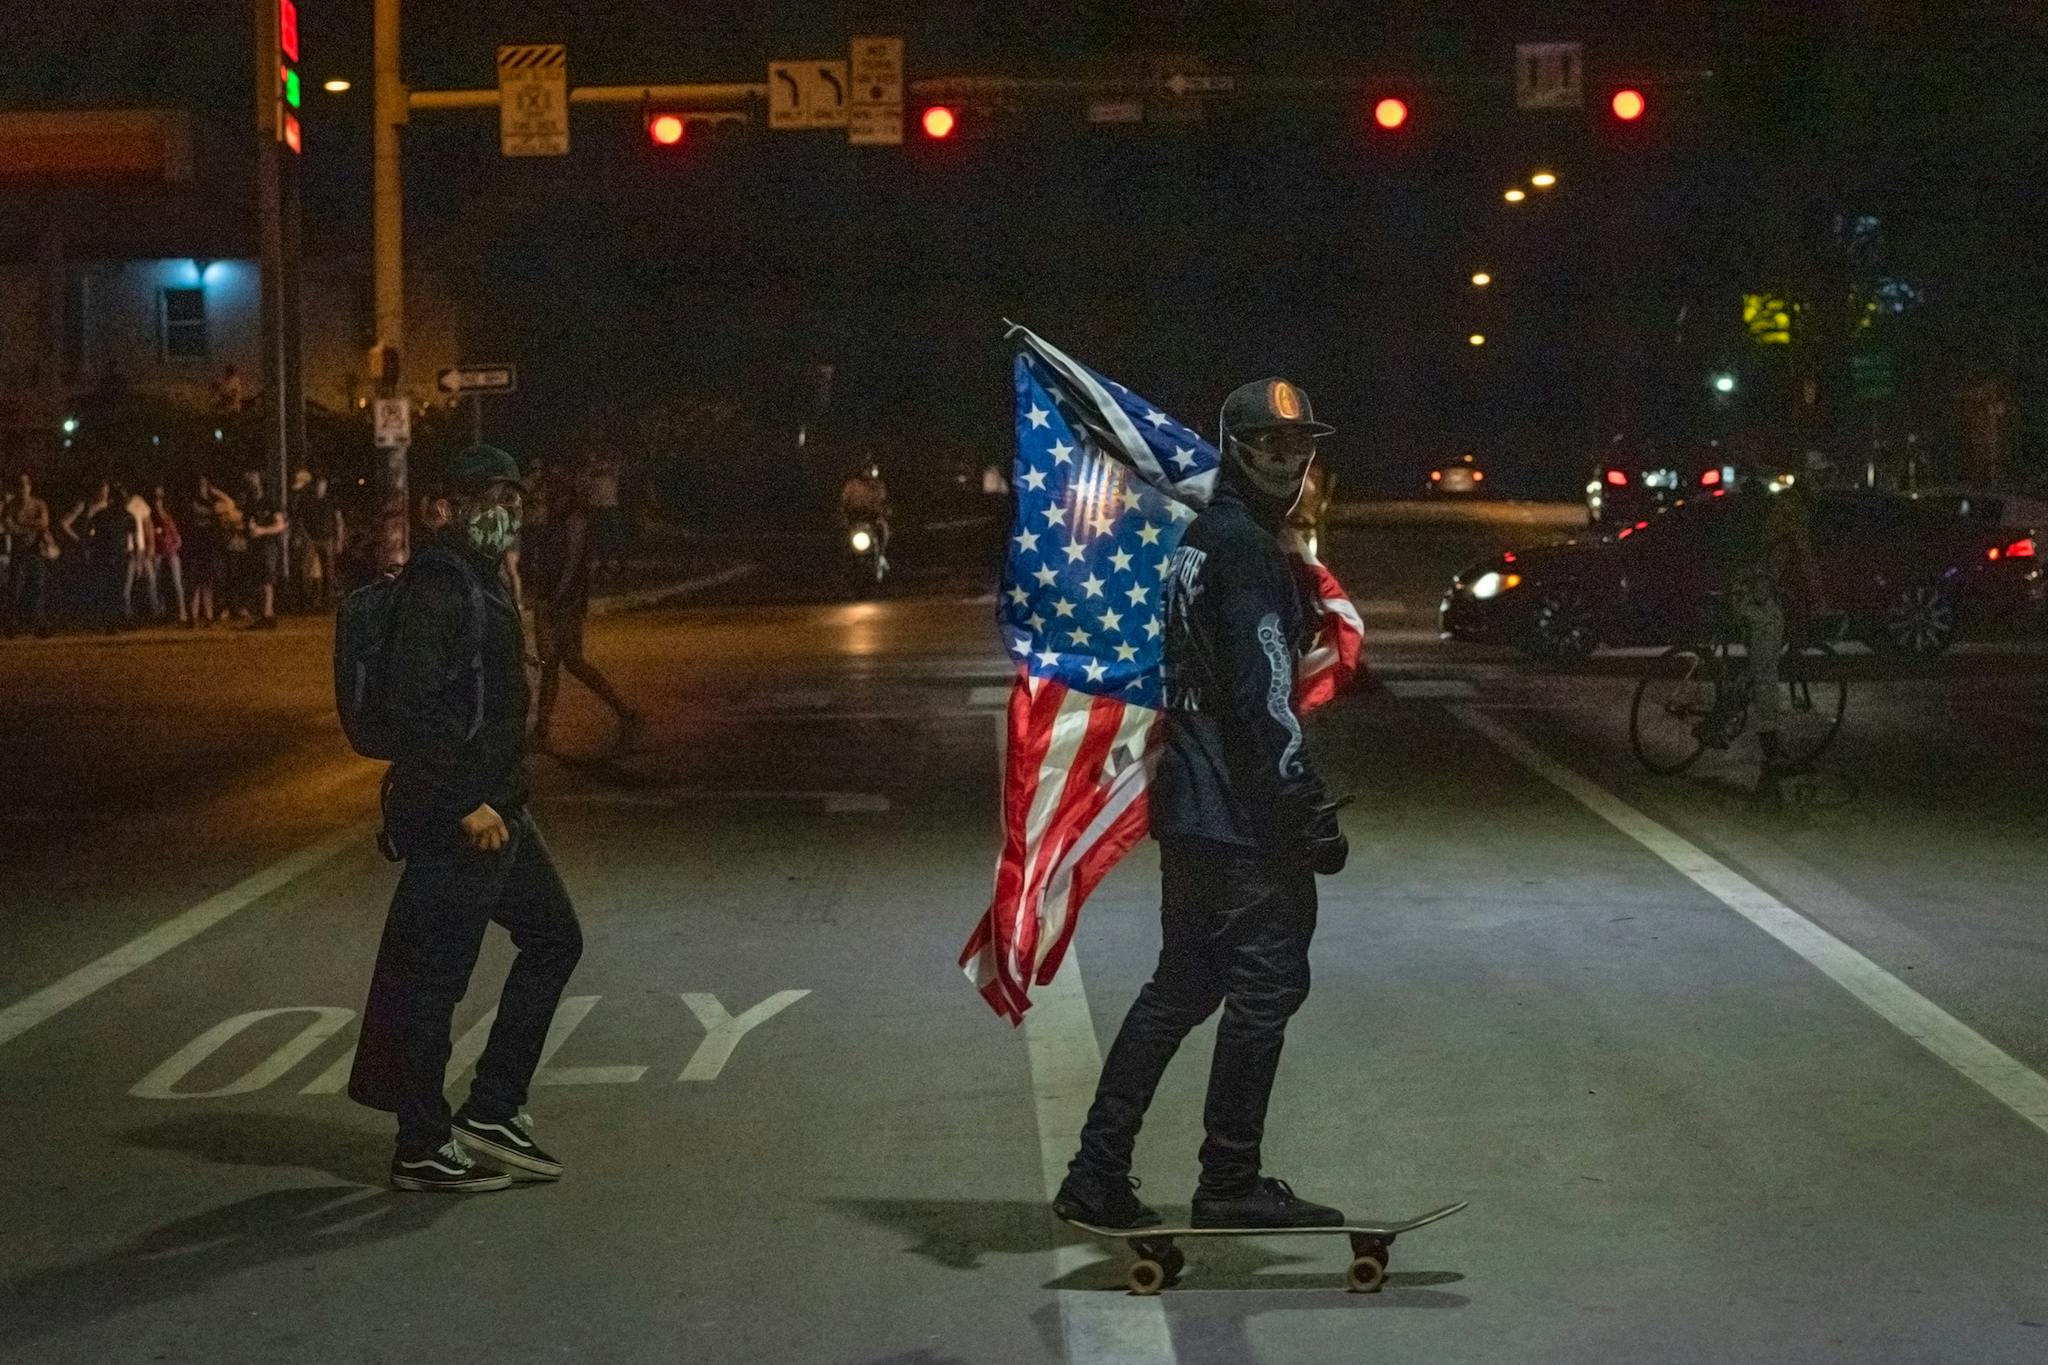 A protester rides a skateboard with an American flag under I-35 at 7th Street in front of police headquarters in Austin on May 30, 2020.